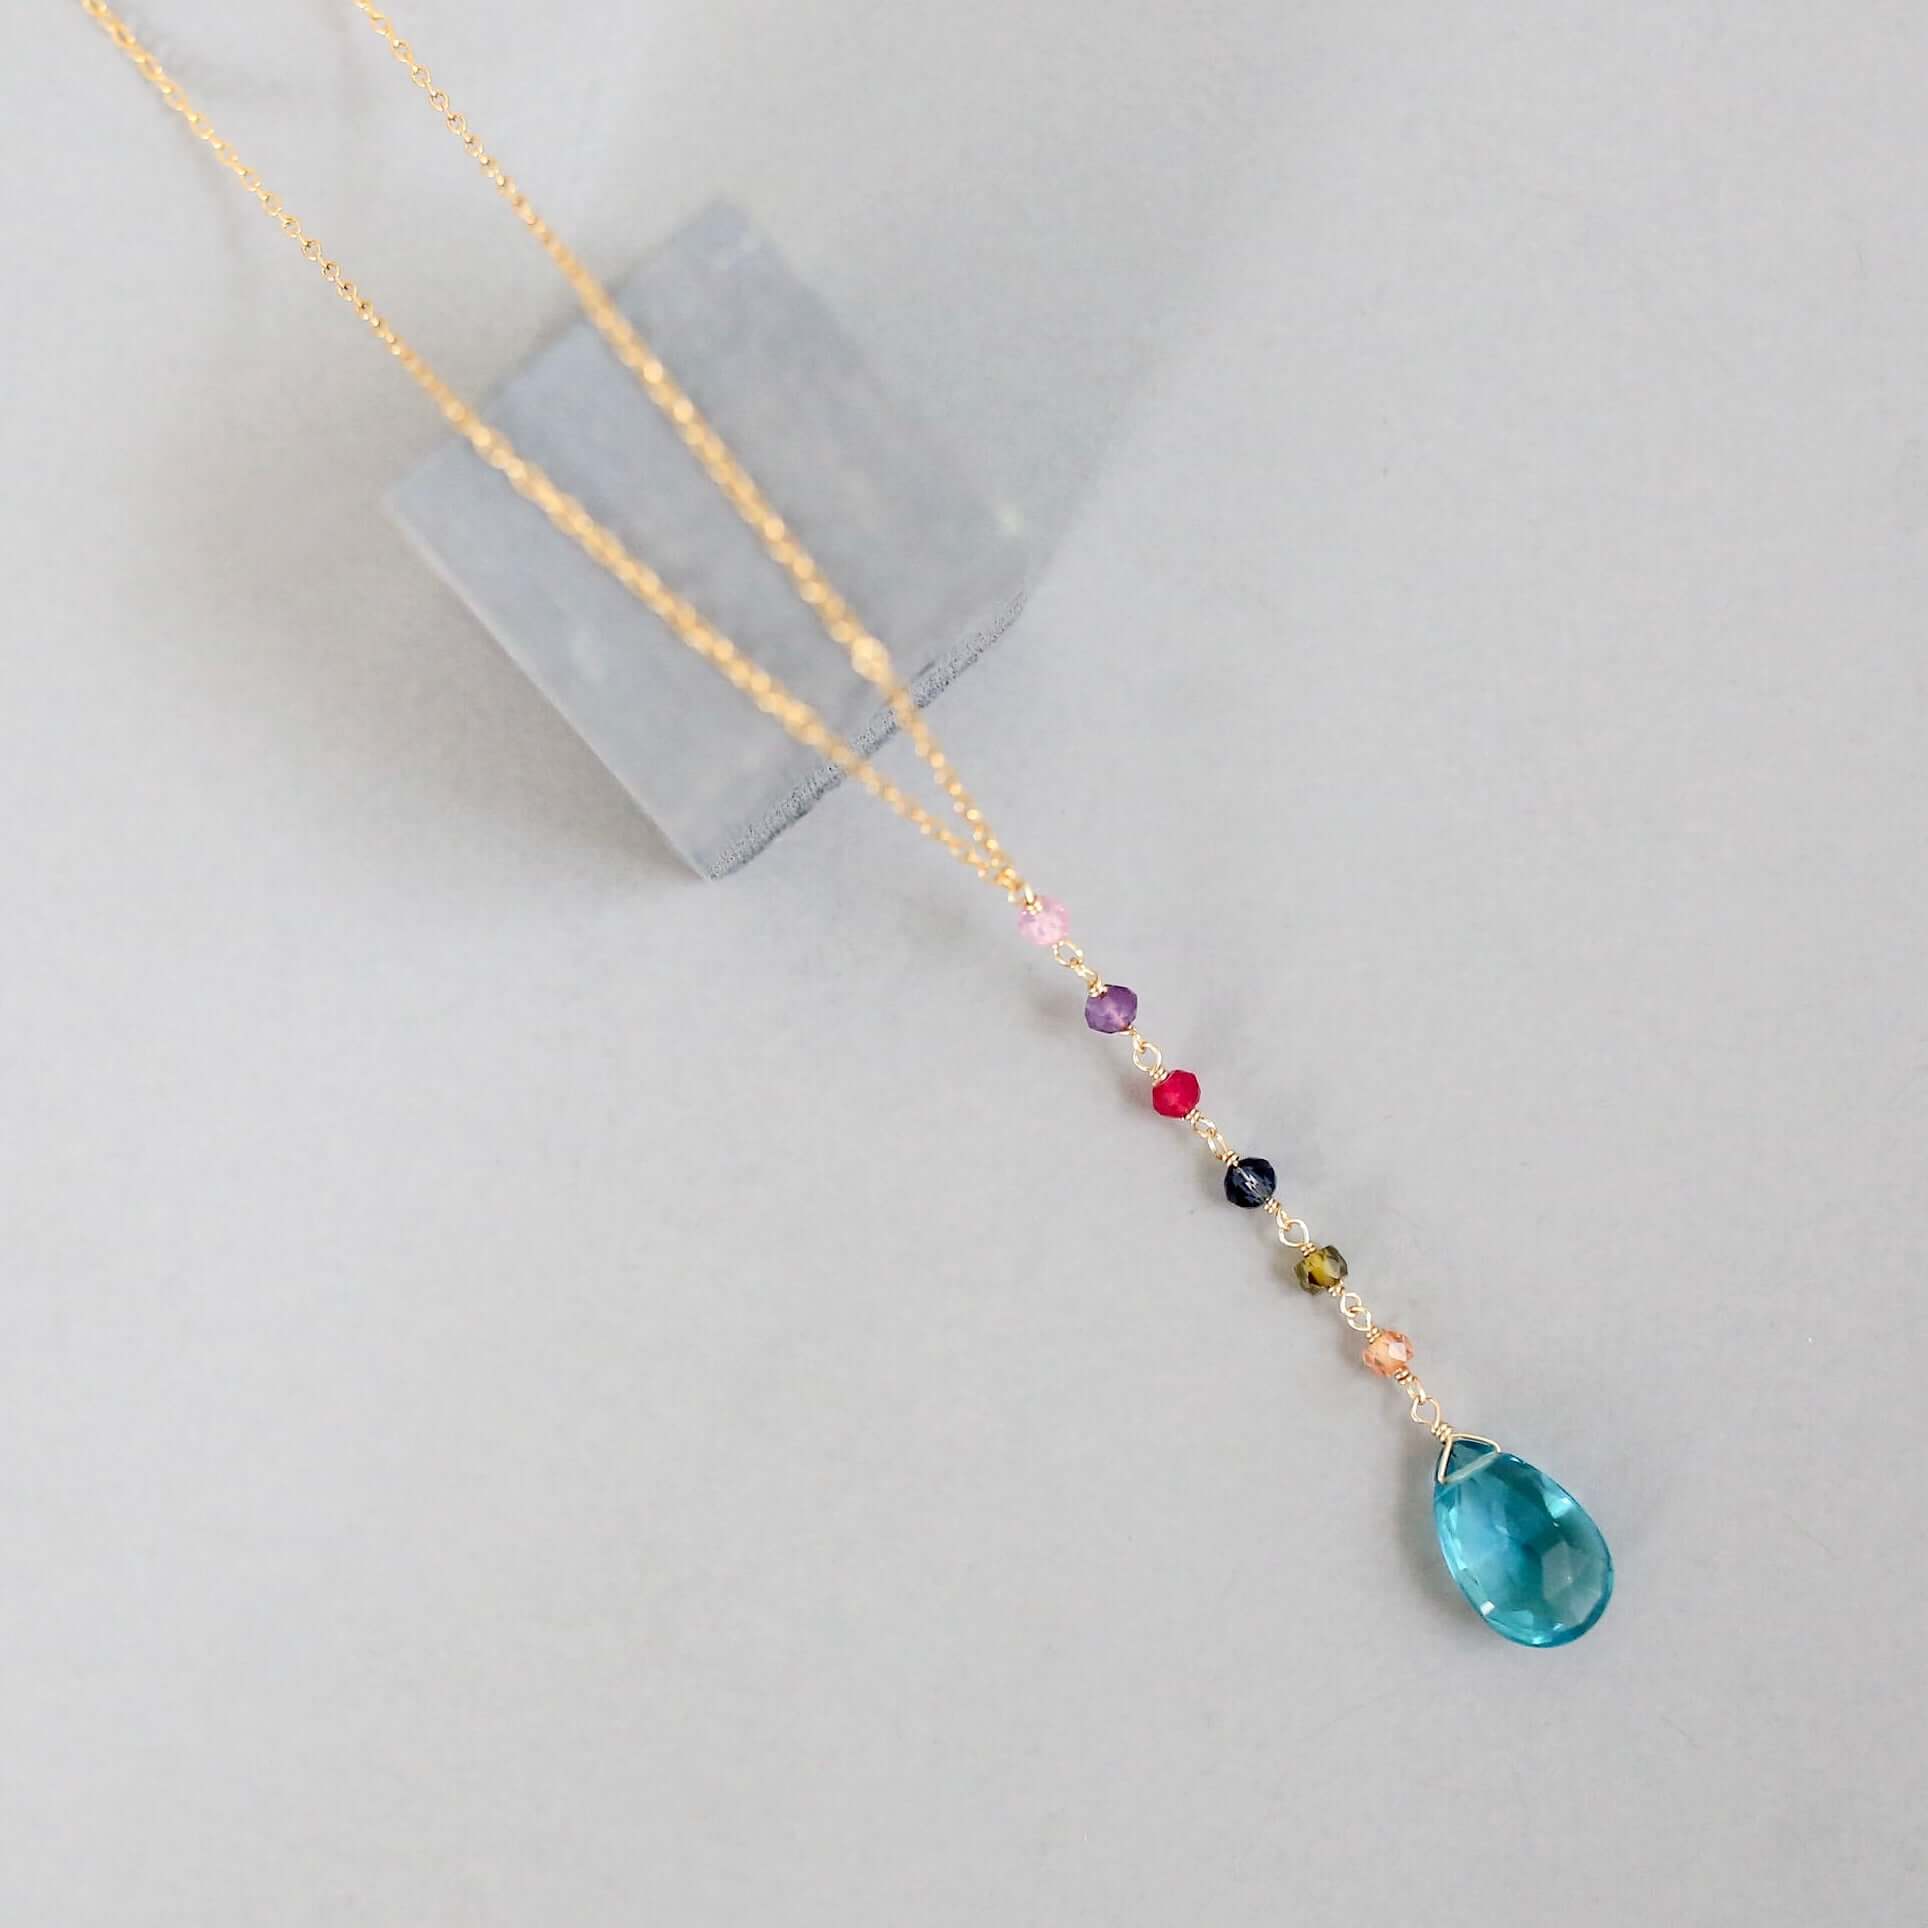 14k Gold Plated Yoga Pendant with Neon Blue Gemstone